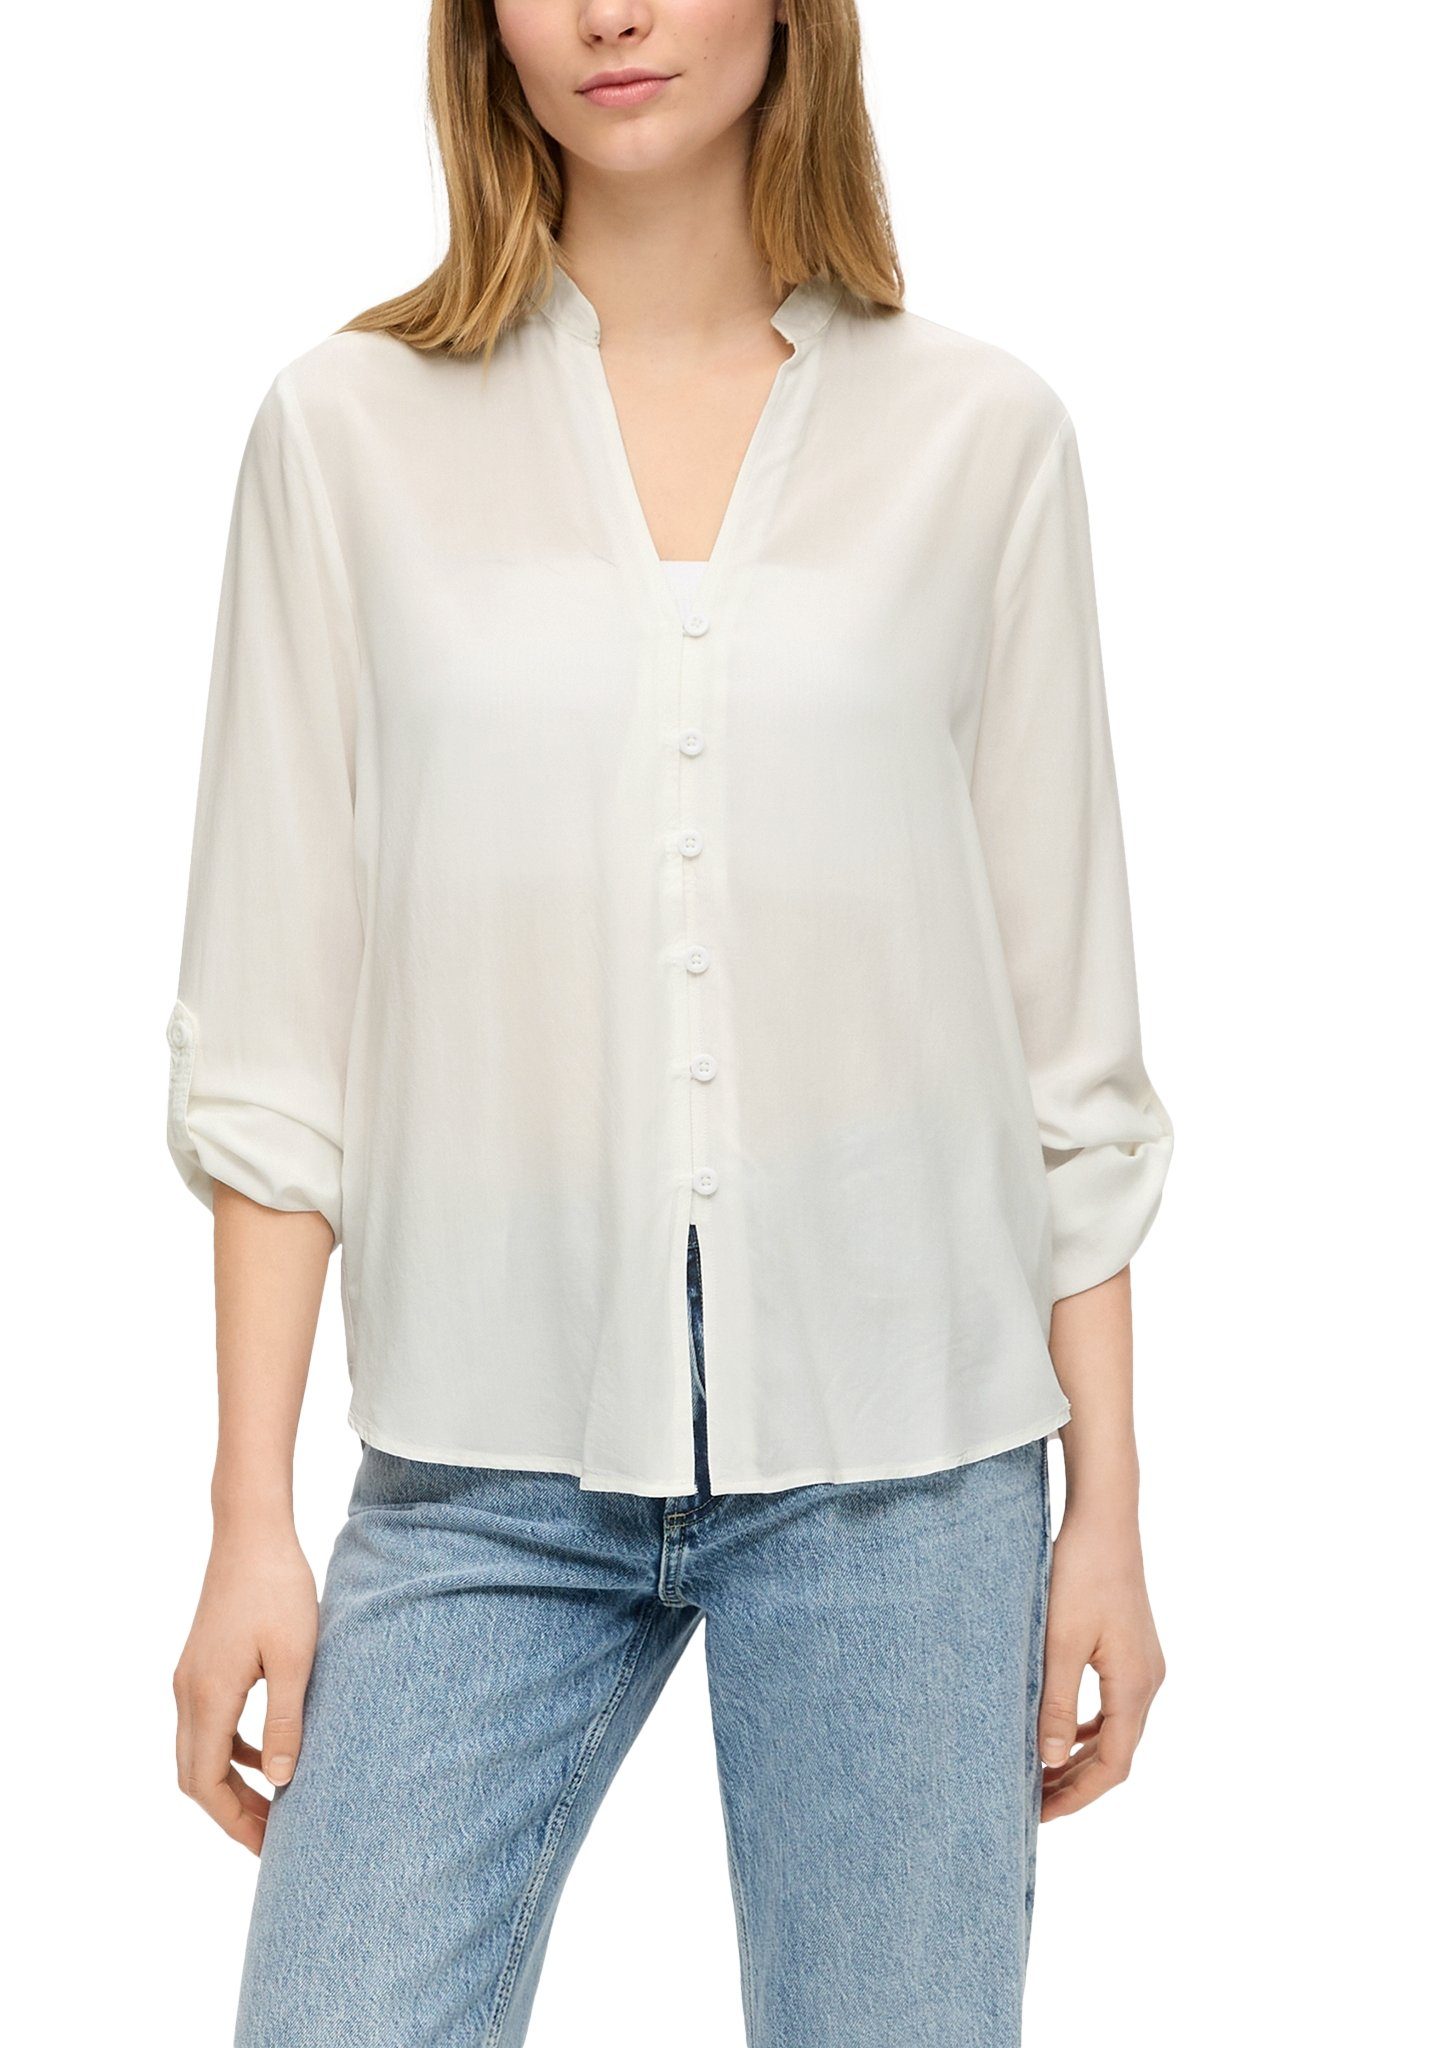 Q S by s.Oliver blouse gebroken wit